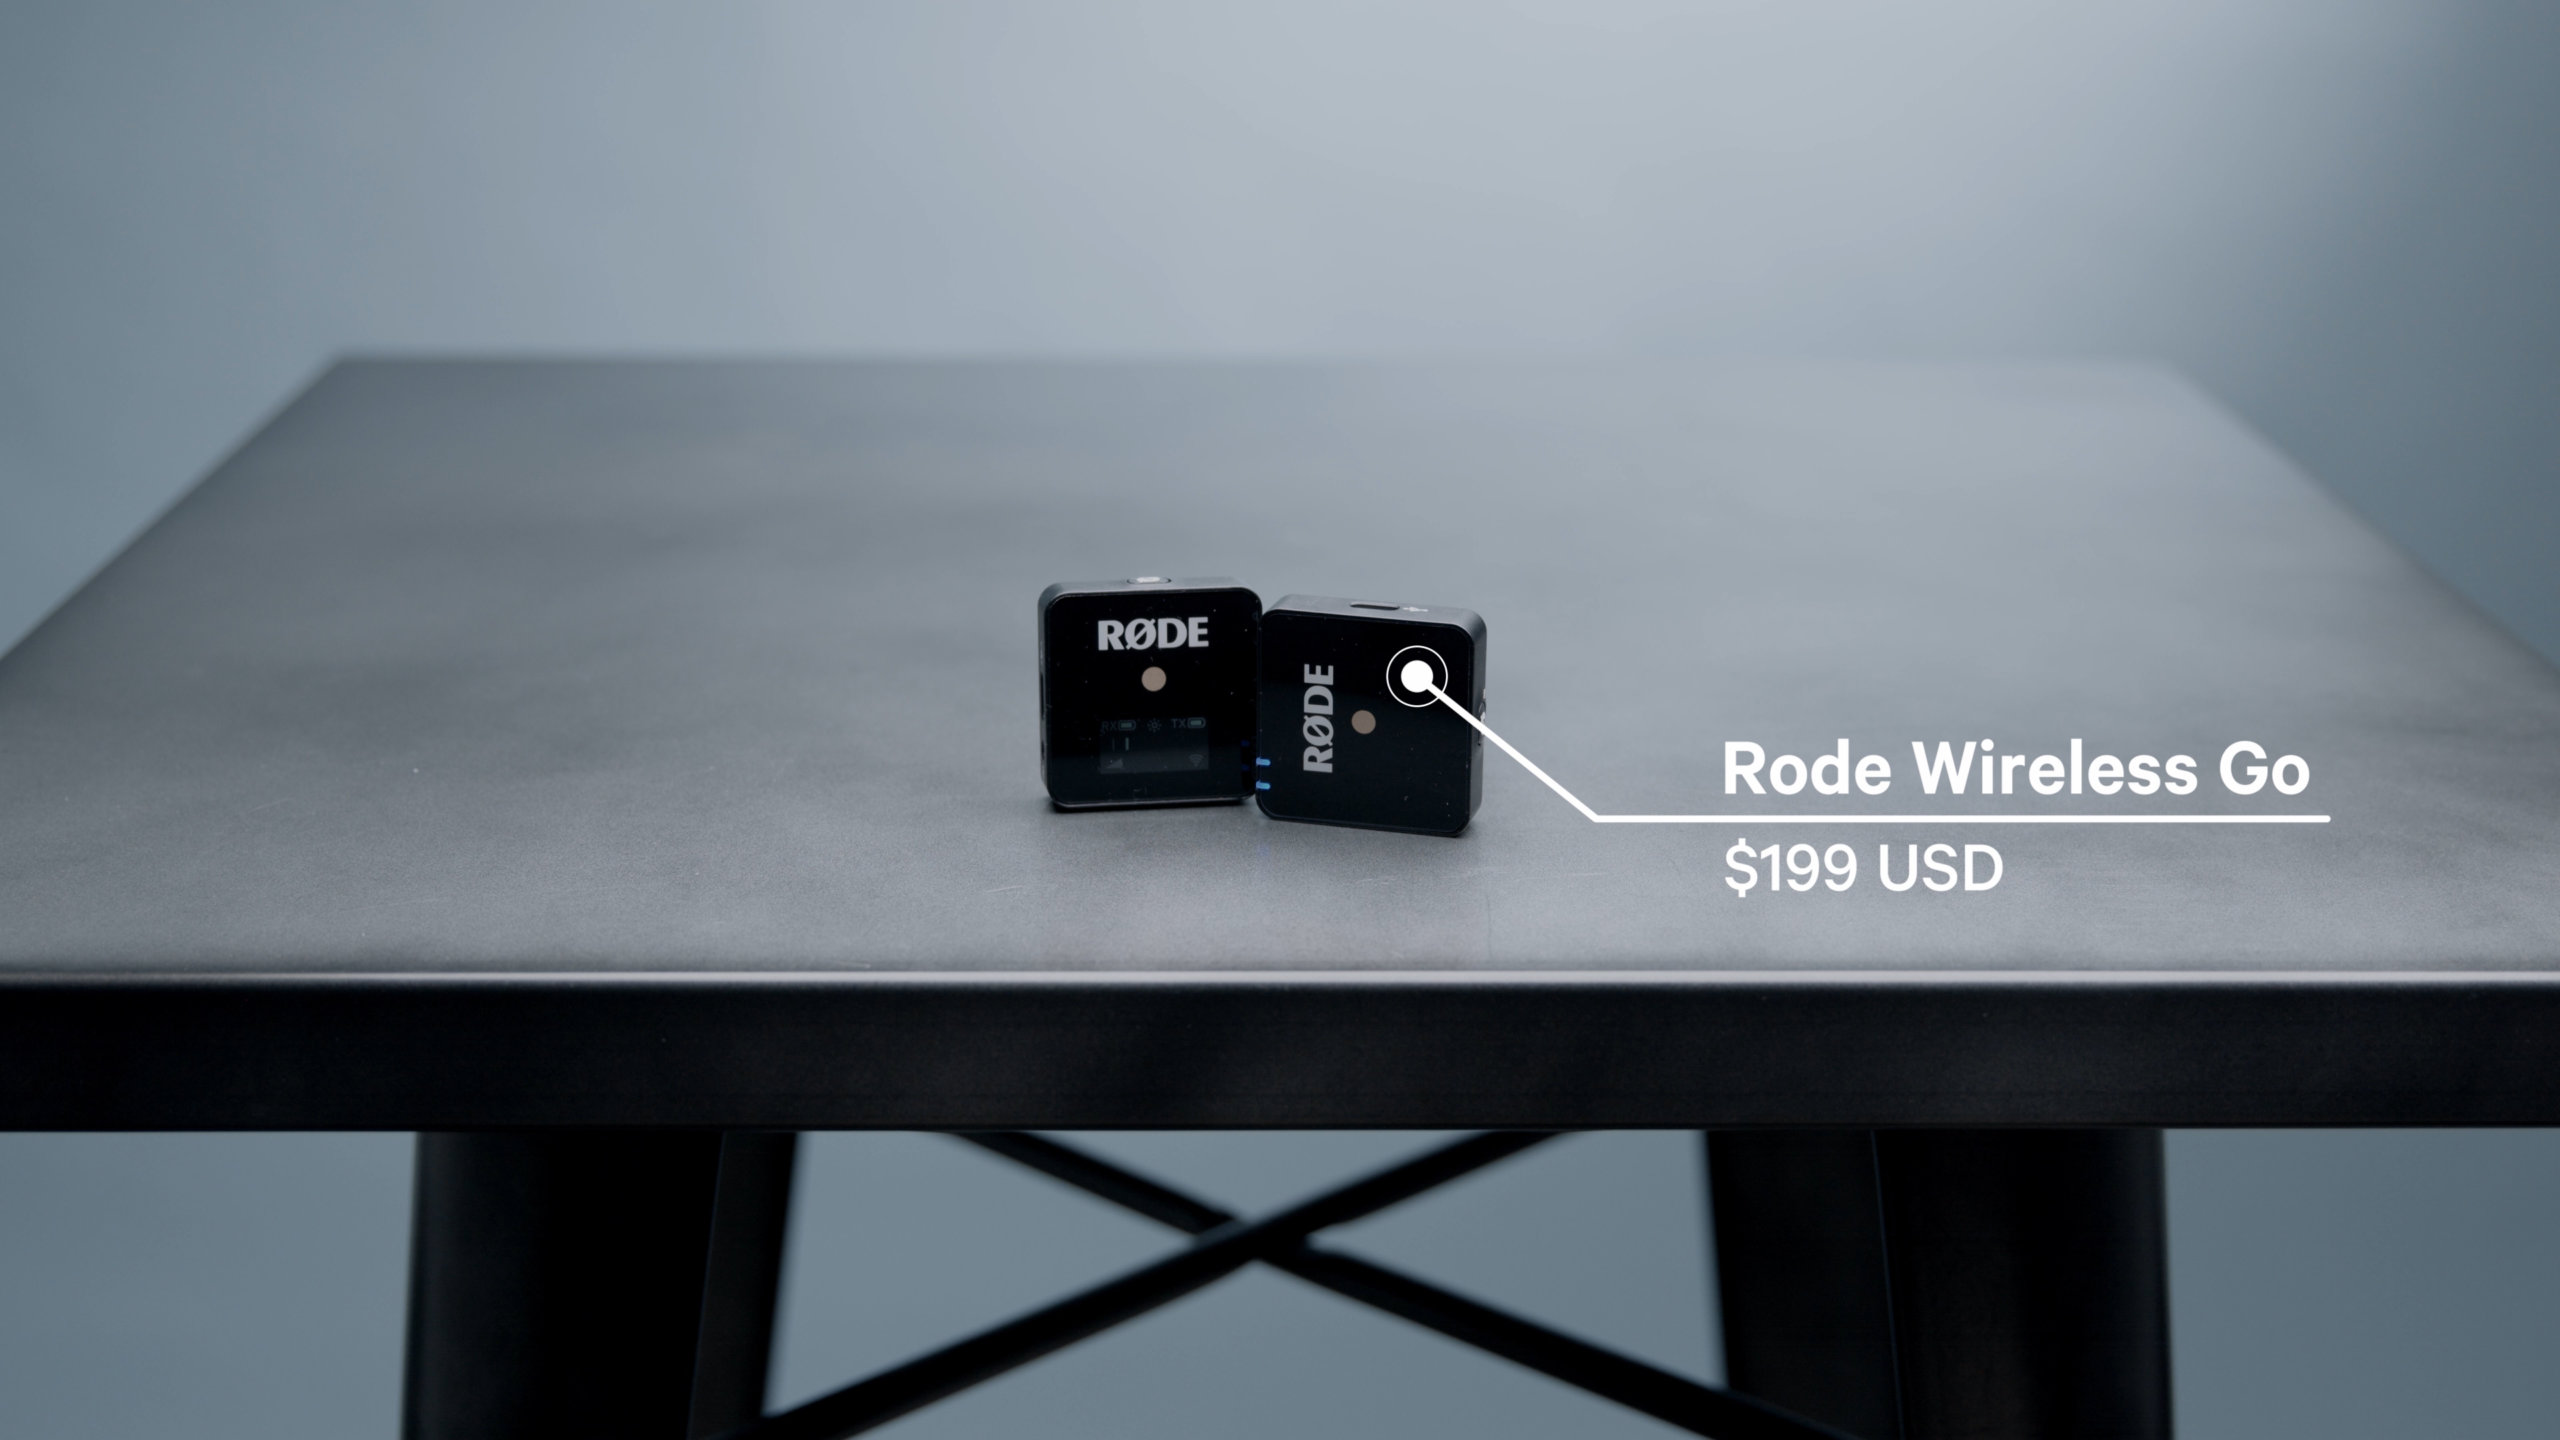 The RODE Wireless GO mic system